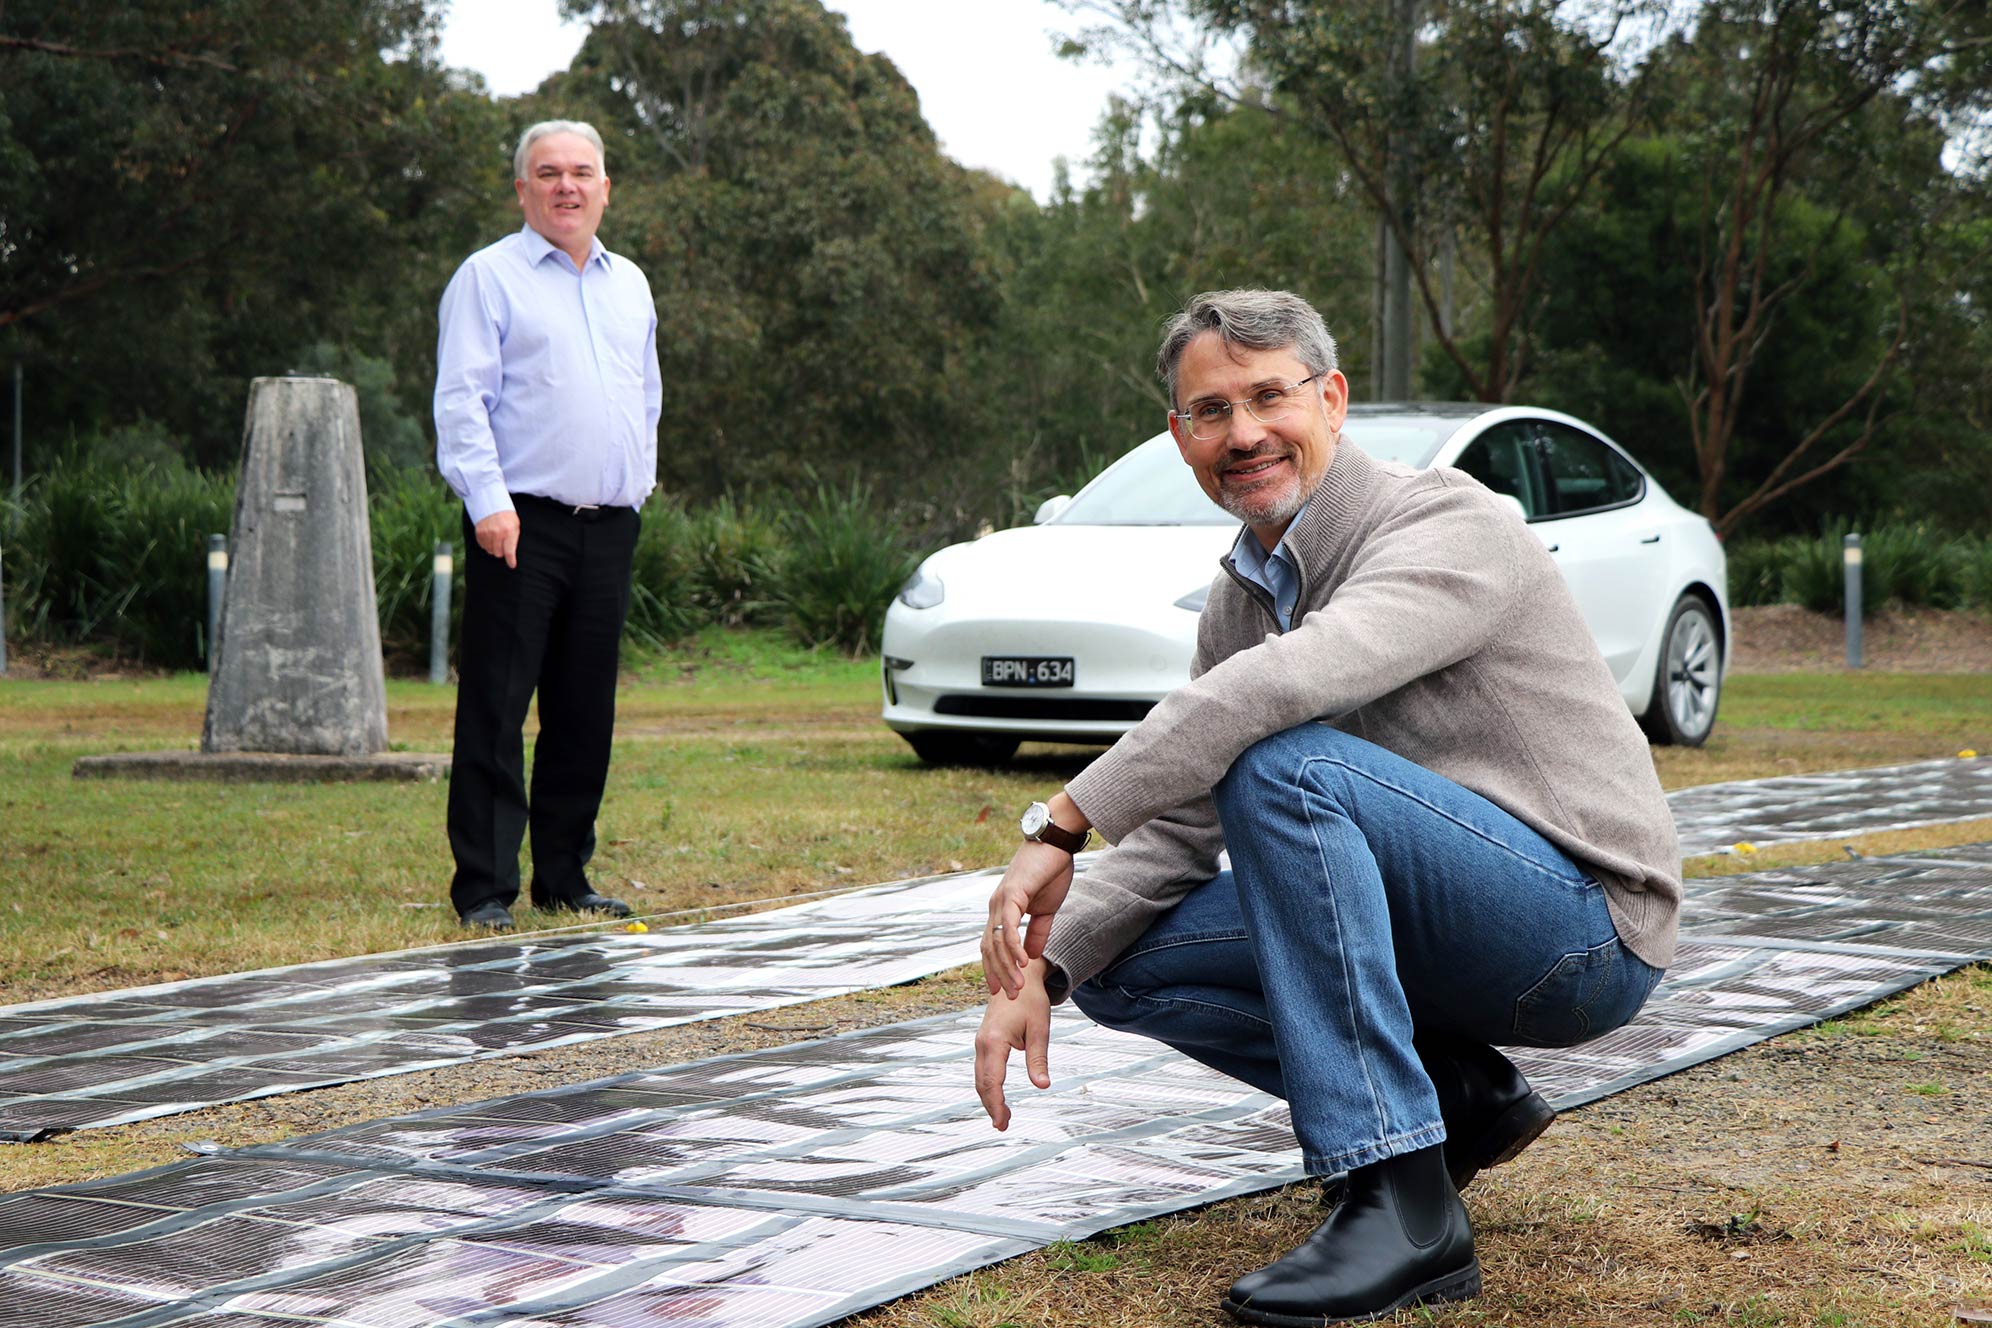 Paul Dastoor is crouched in foreground with printed solar laid on the ground and Stuart McBain in the background with an electric vehicle